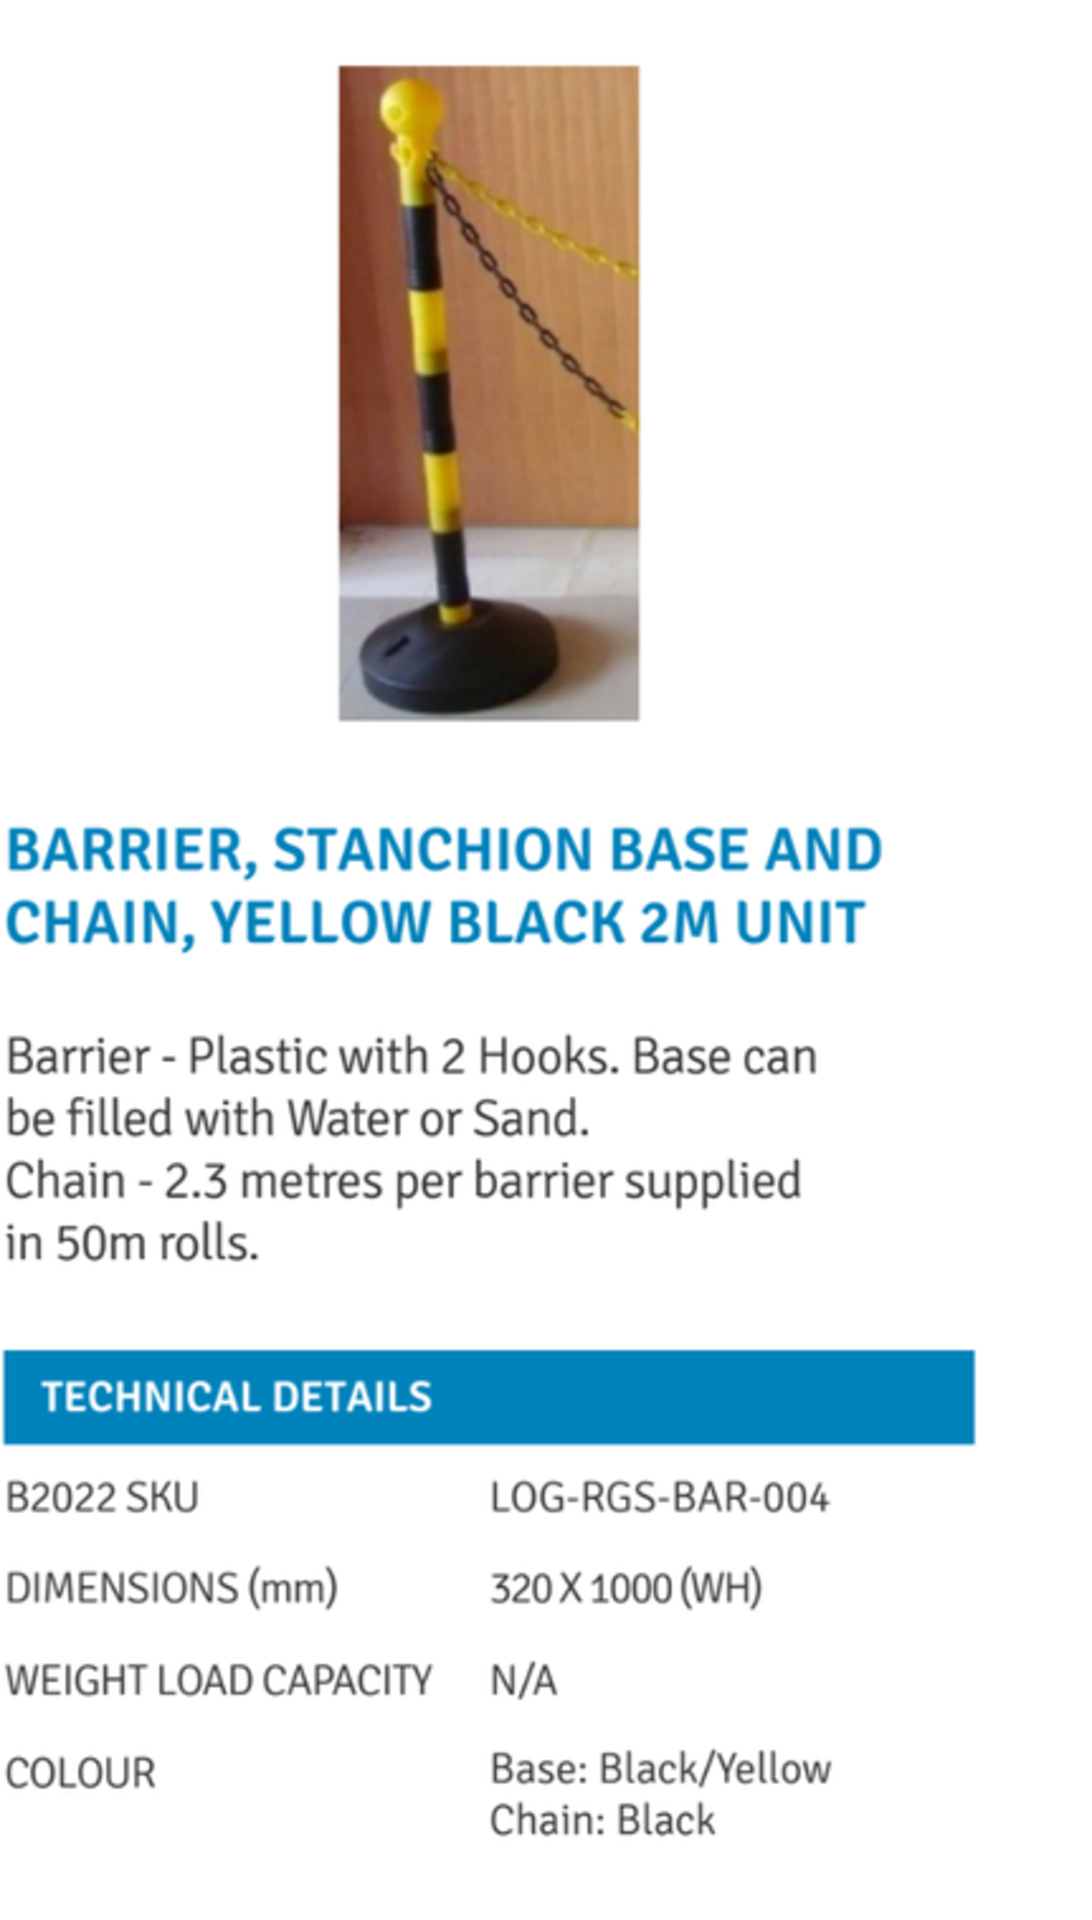 RRP £6300 Pallets To Contain Barrier, Stanchion Base and Chain, Plastic Unit